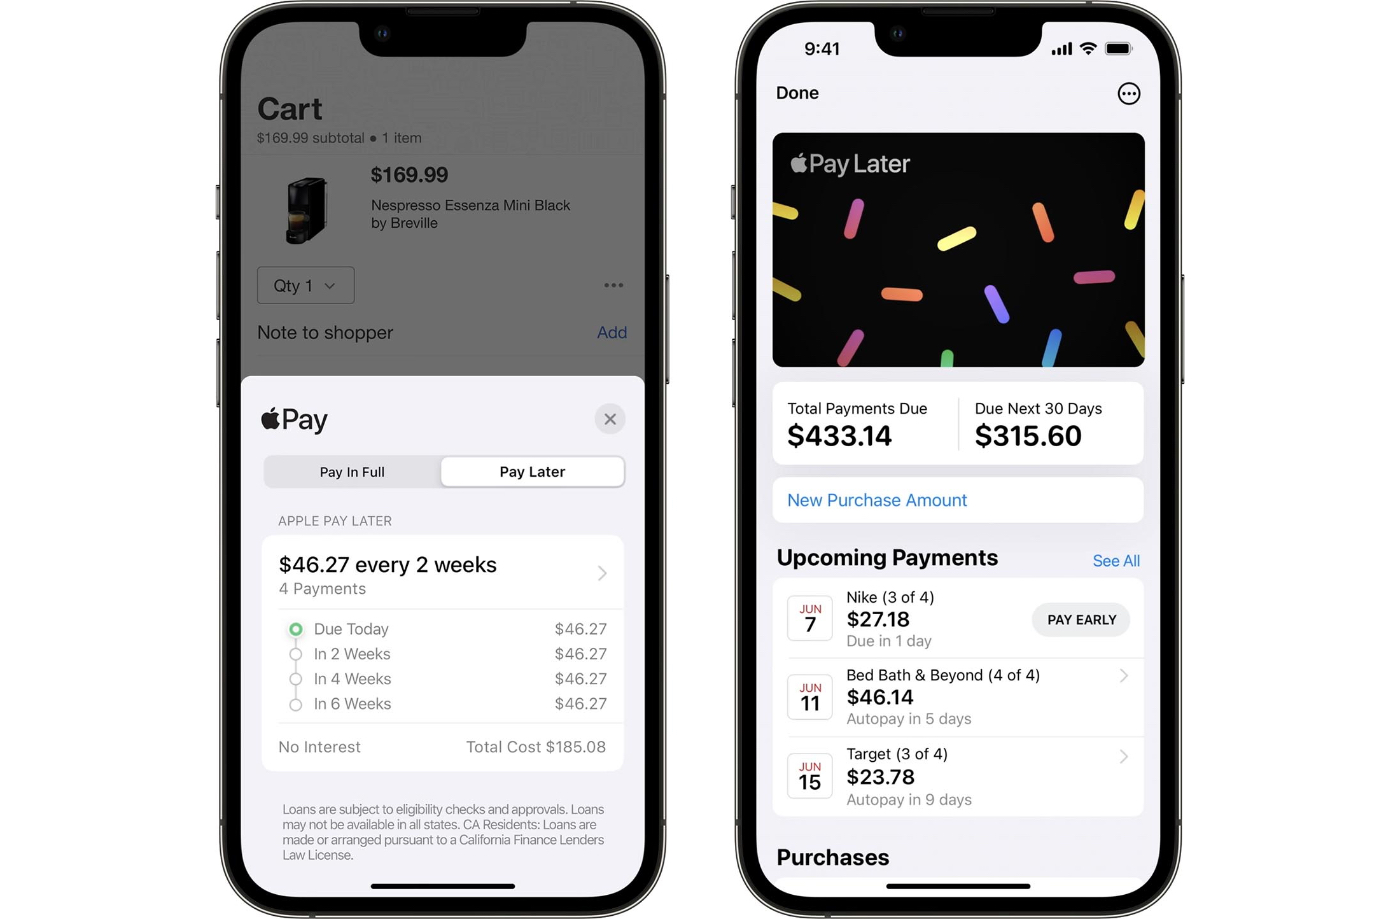 Apple Pay Later is coming to more users